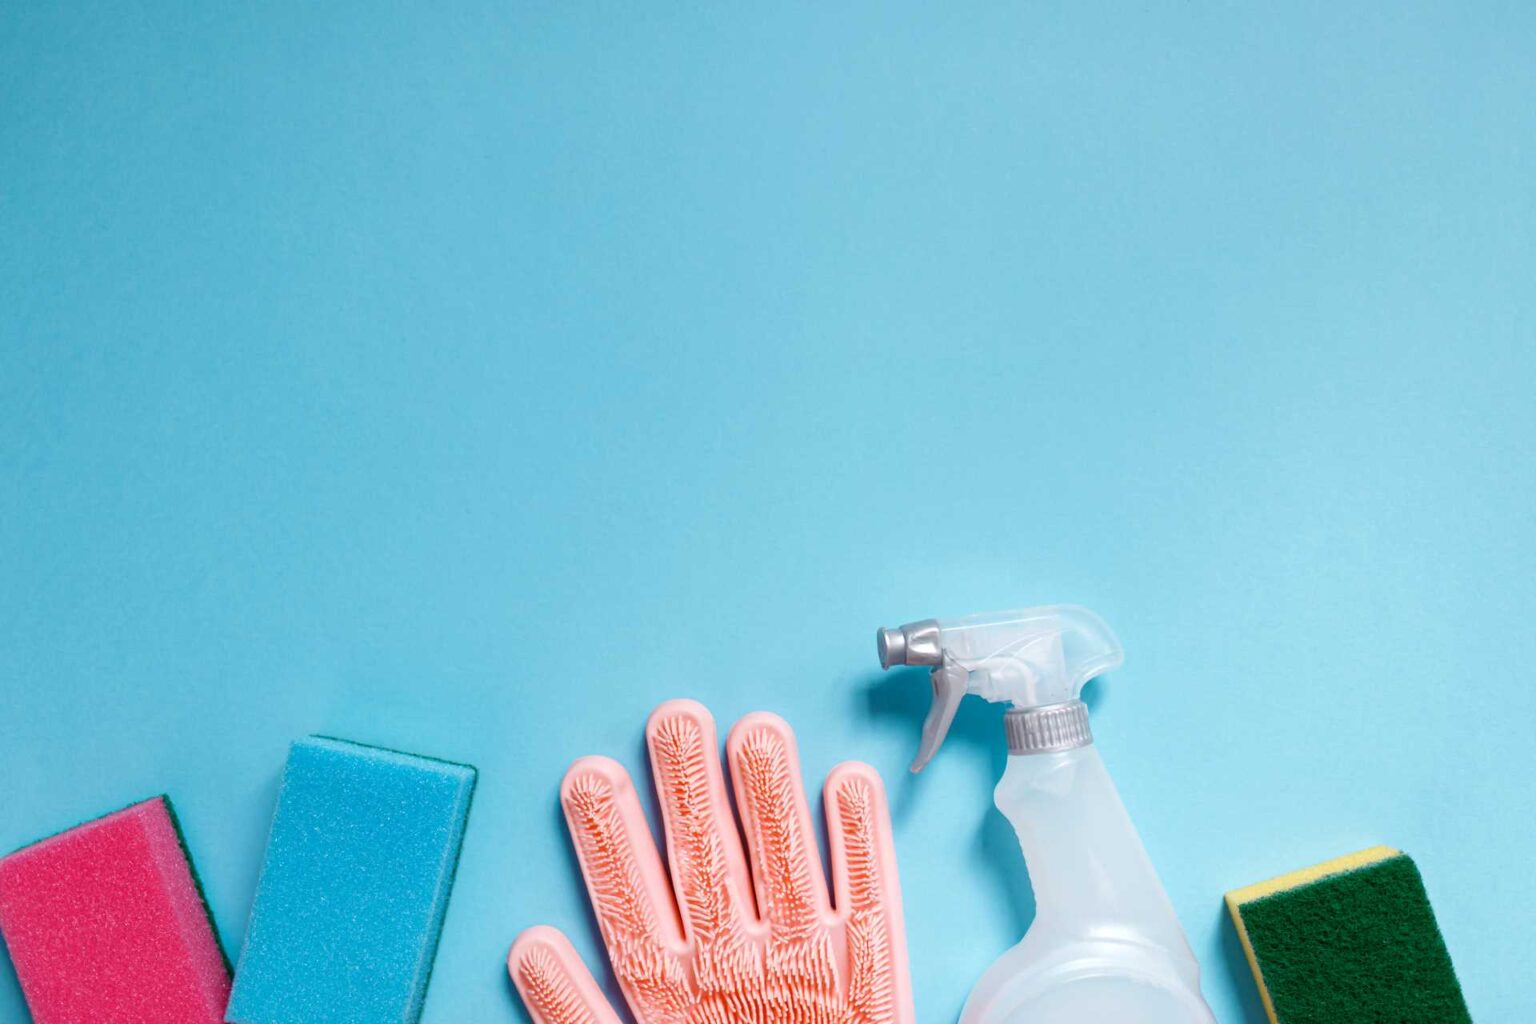 Cleaning supplies | Featured Image for the Commercial Cleaning Company Home Page of QCS Cleaning.